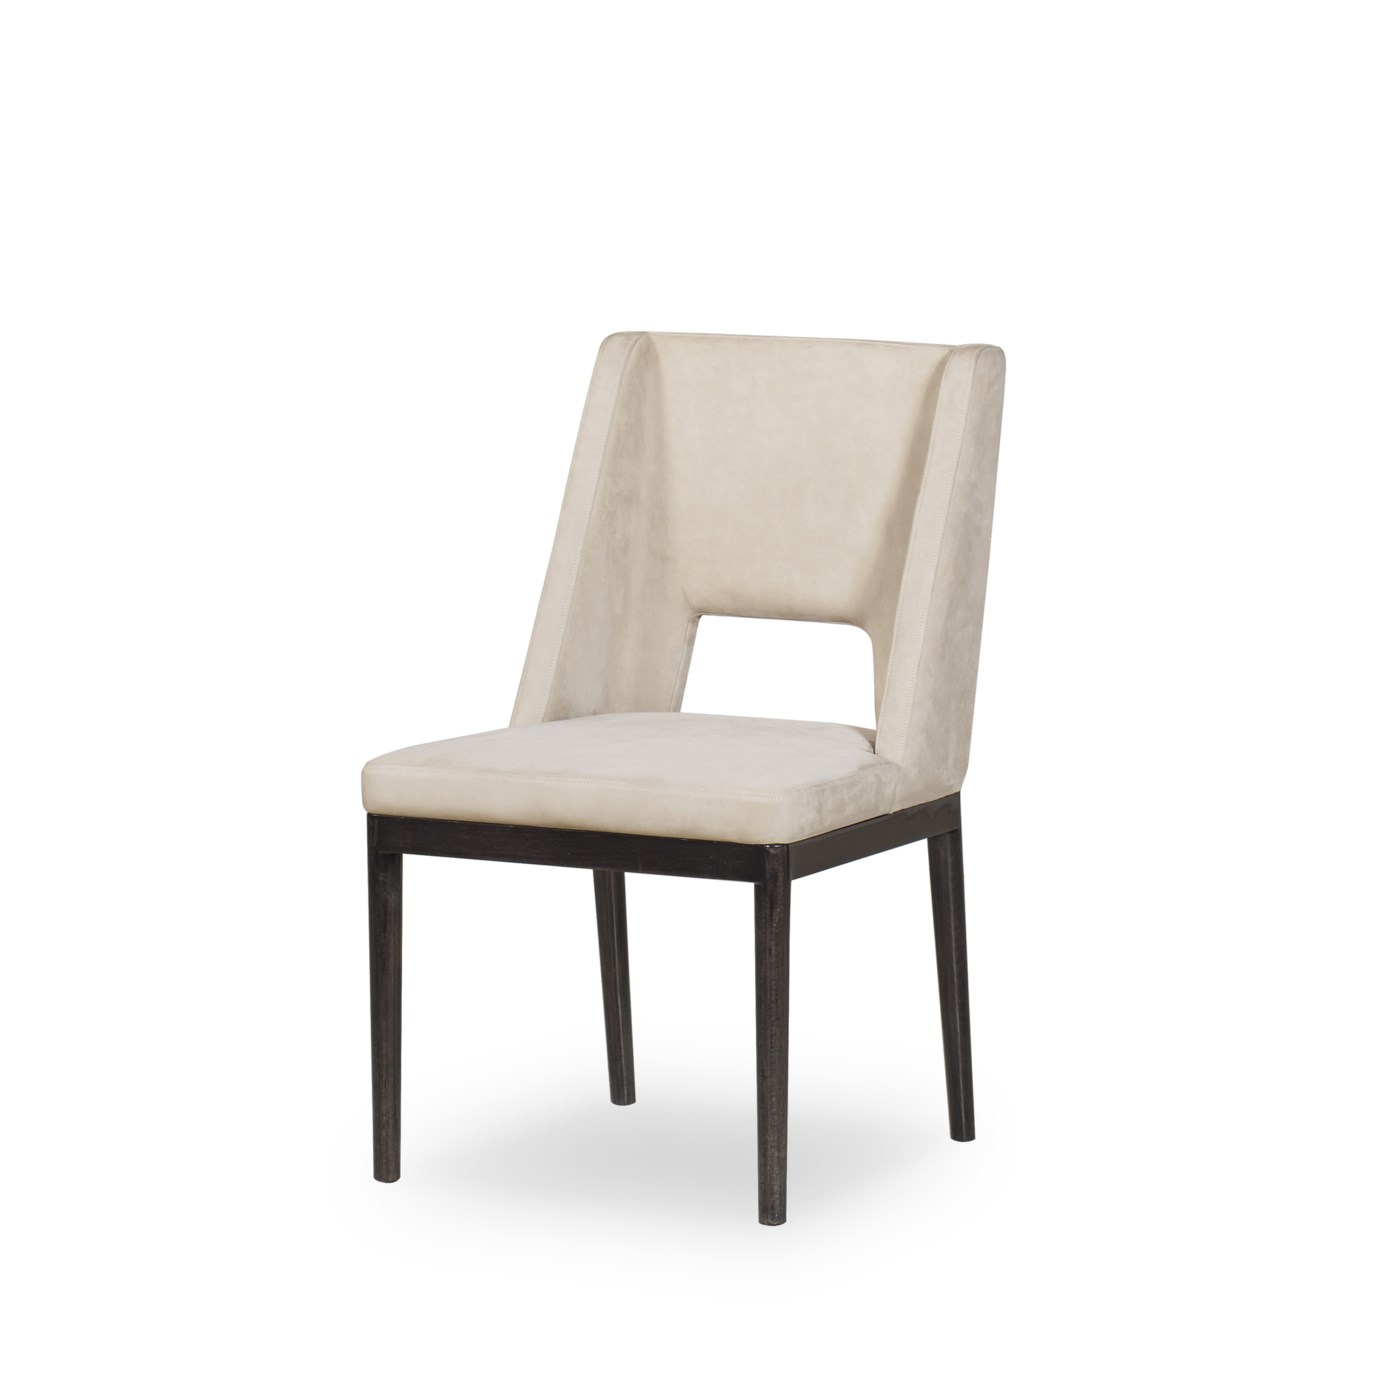 Maddison Dining Chair Finley Beige Leather dining